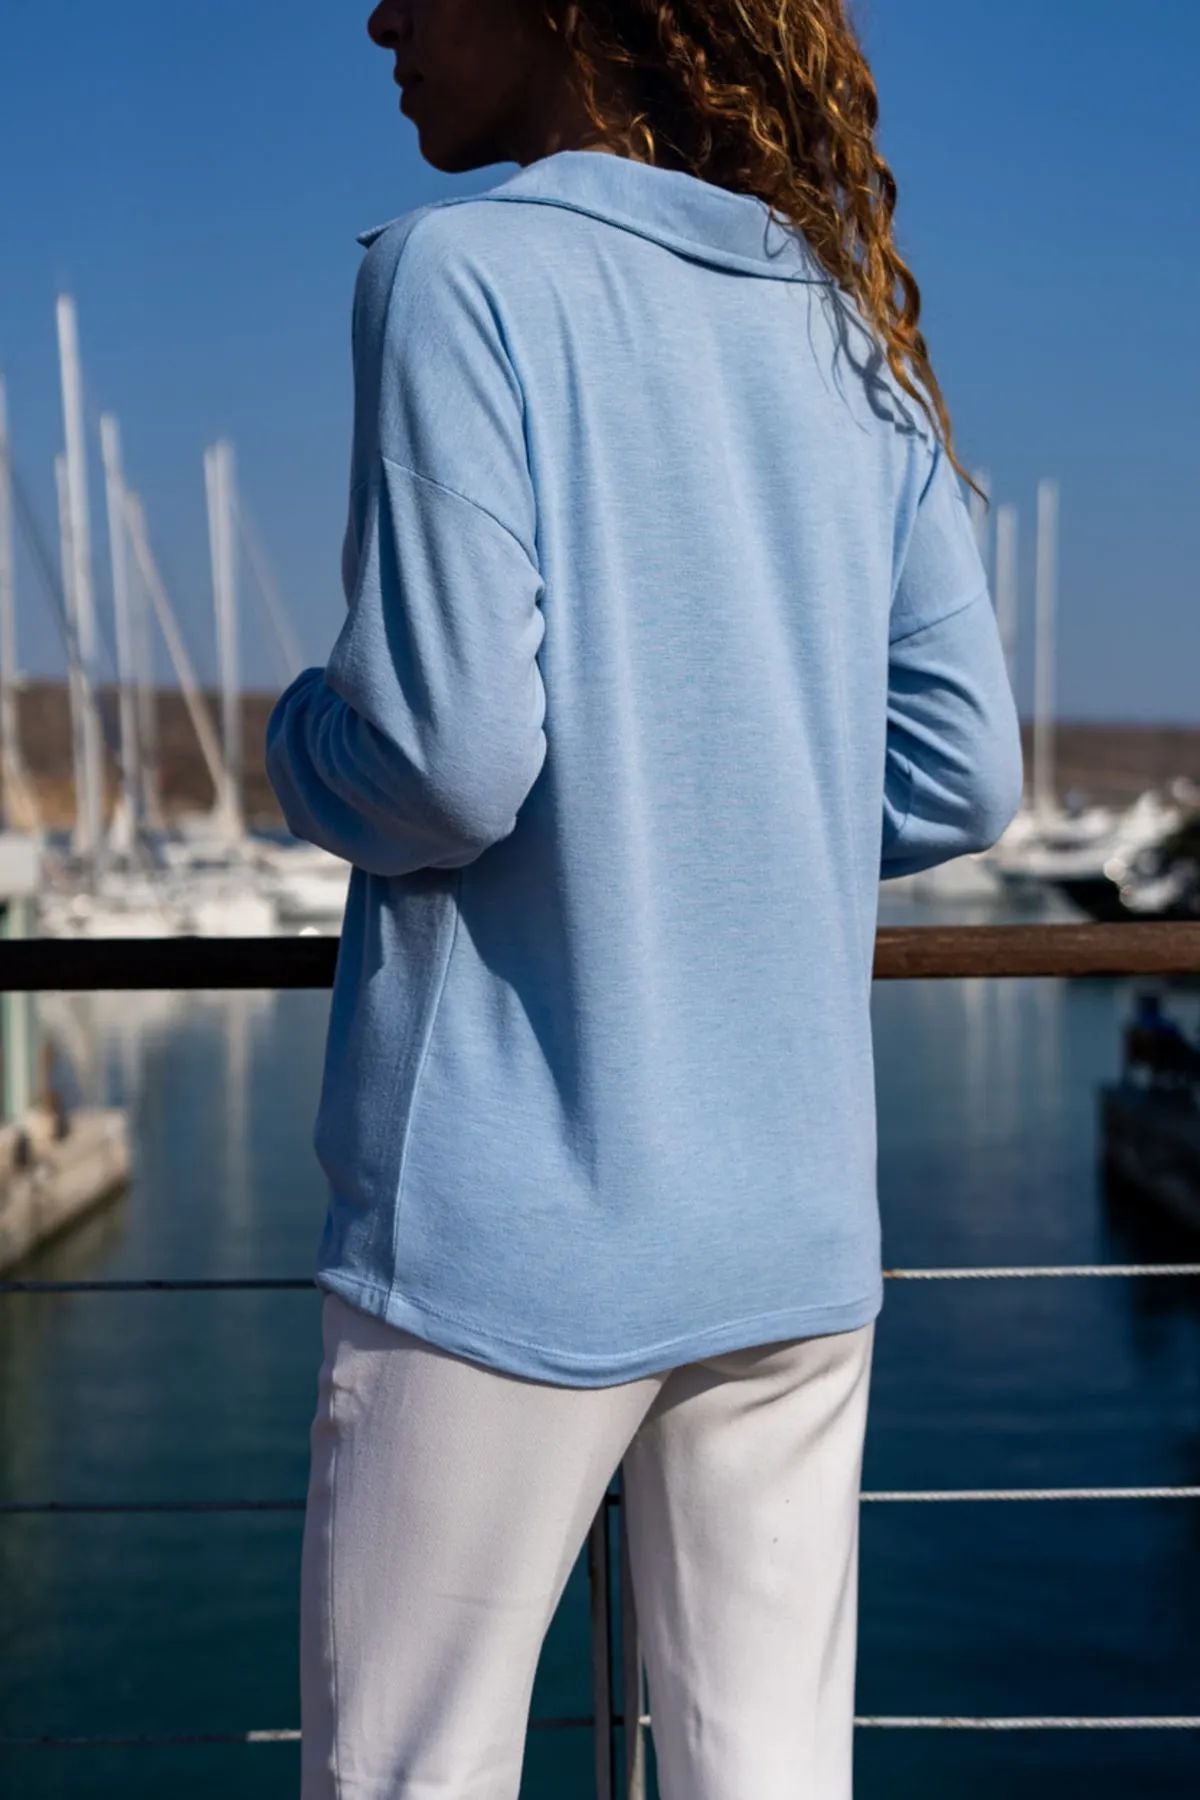 Textured Baby Blue Women's Blouse - Polo Collar, Long Sleeve & Buttonless Details for Comfort (Polyester, Elastane Fabric)